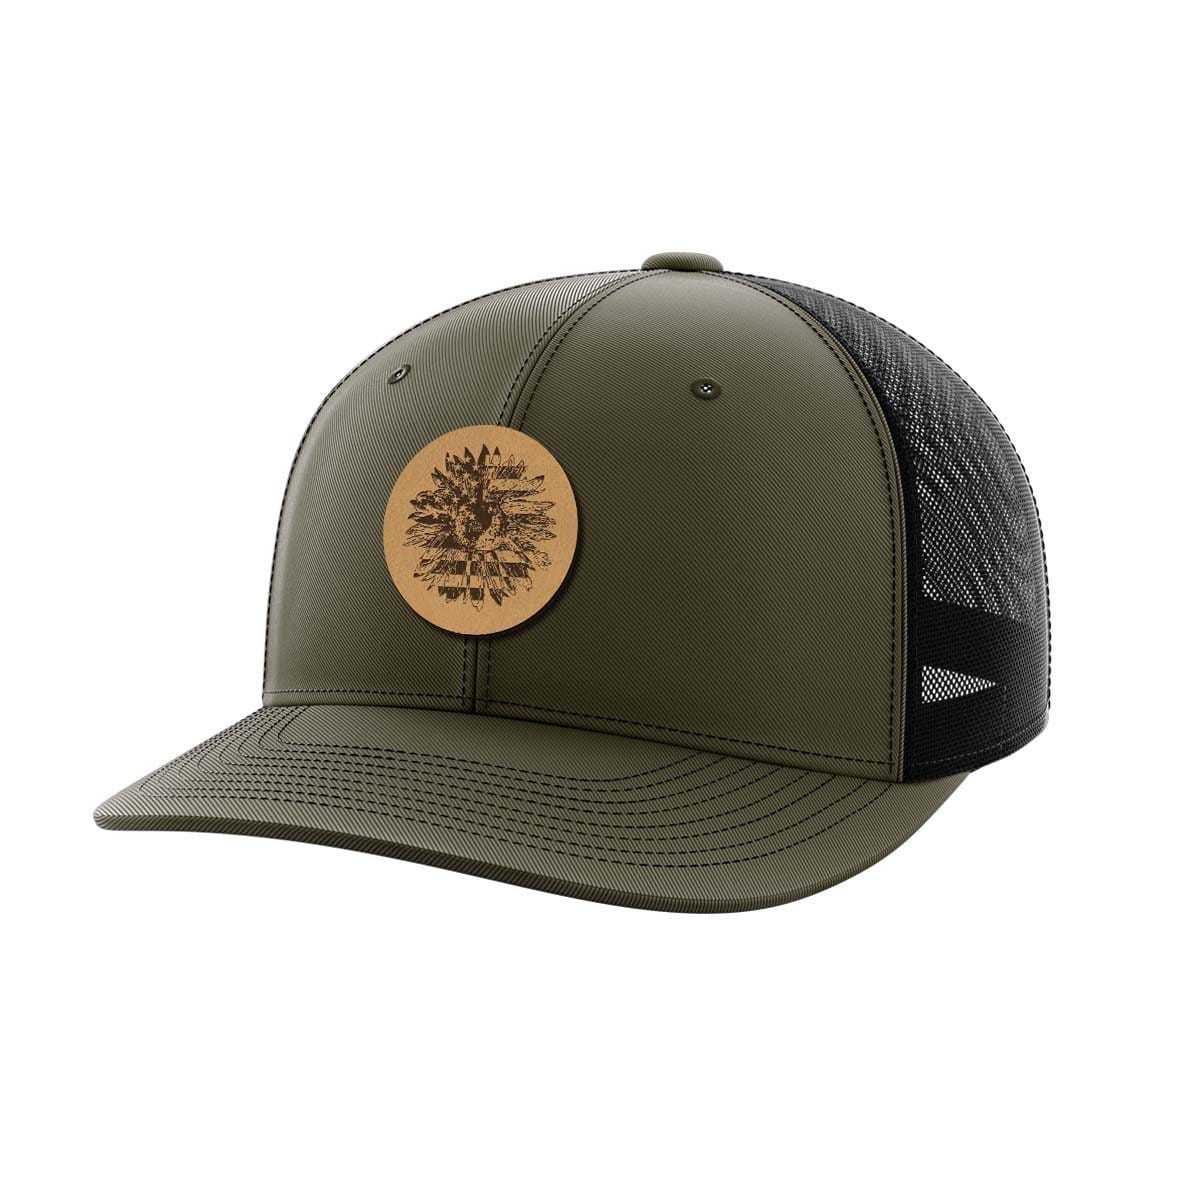 Sunflower Leather Patch Hat - Greater Half